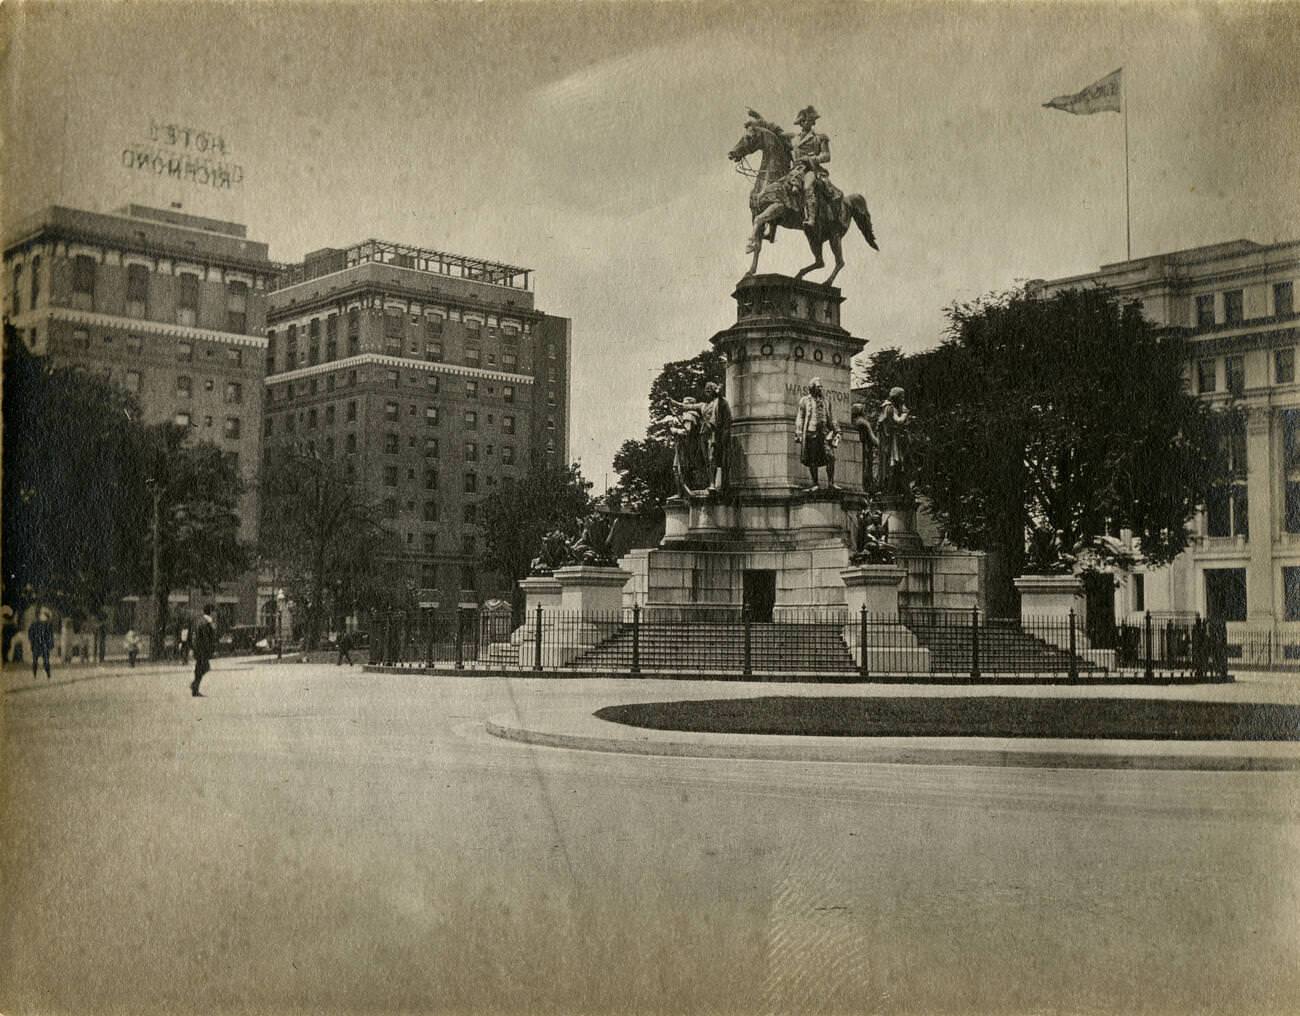 Statue of George Washington and Hotel Richmond in downtown Richmond, Virginia, 1910s